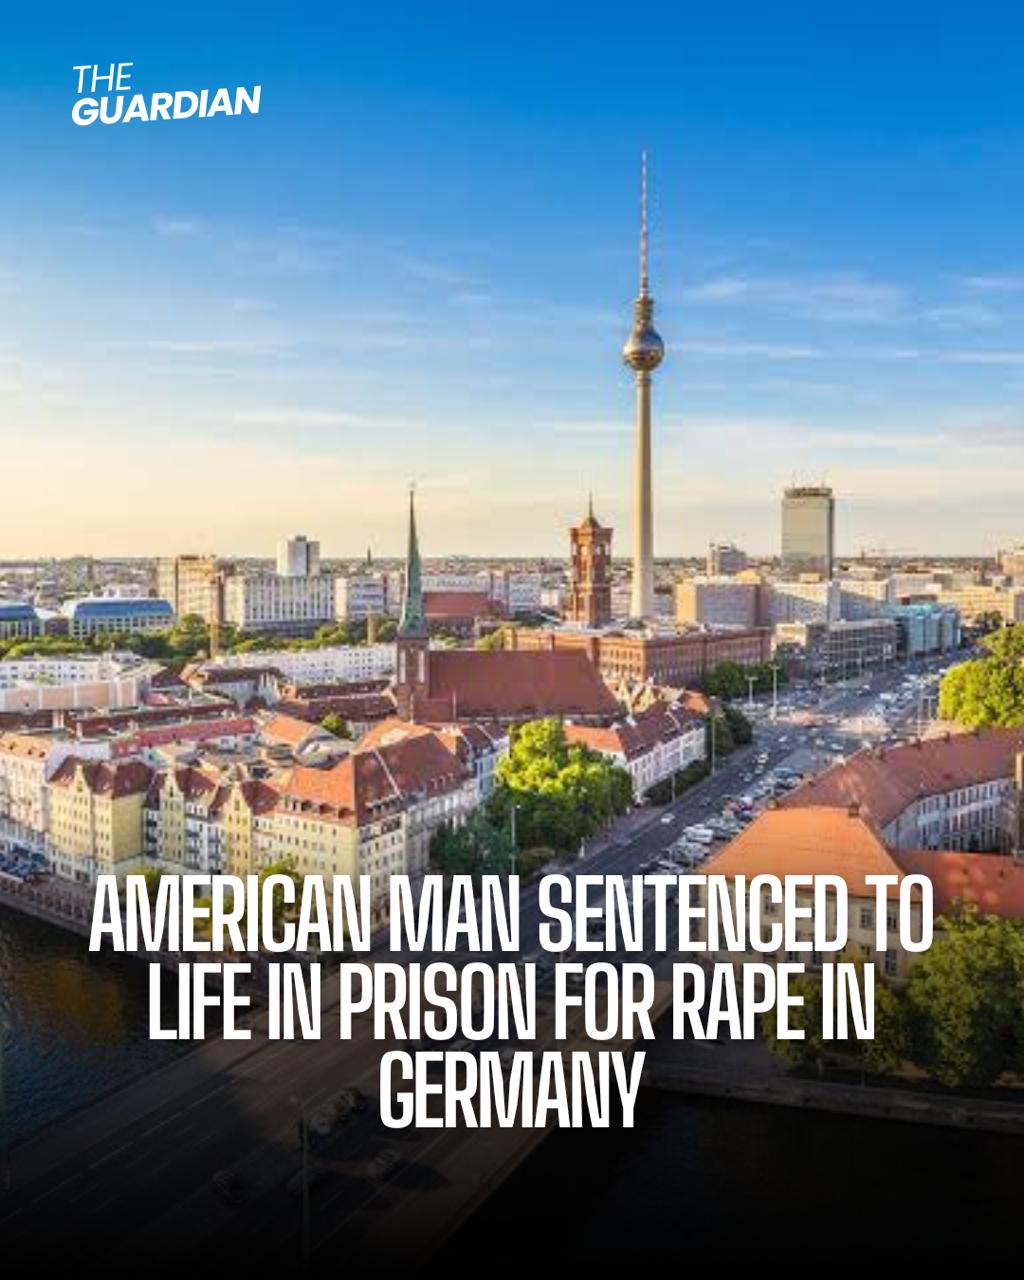 A male identified by a German court as Troy B attacked two American females near a tourist place in June.